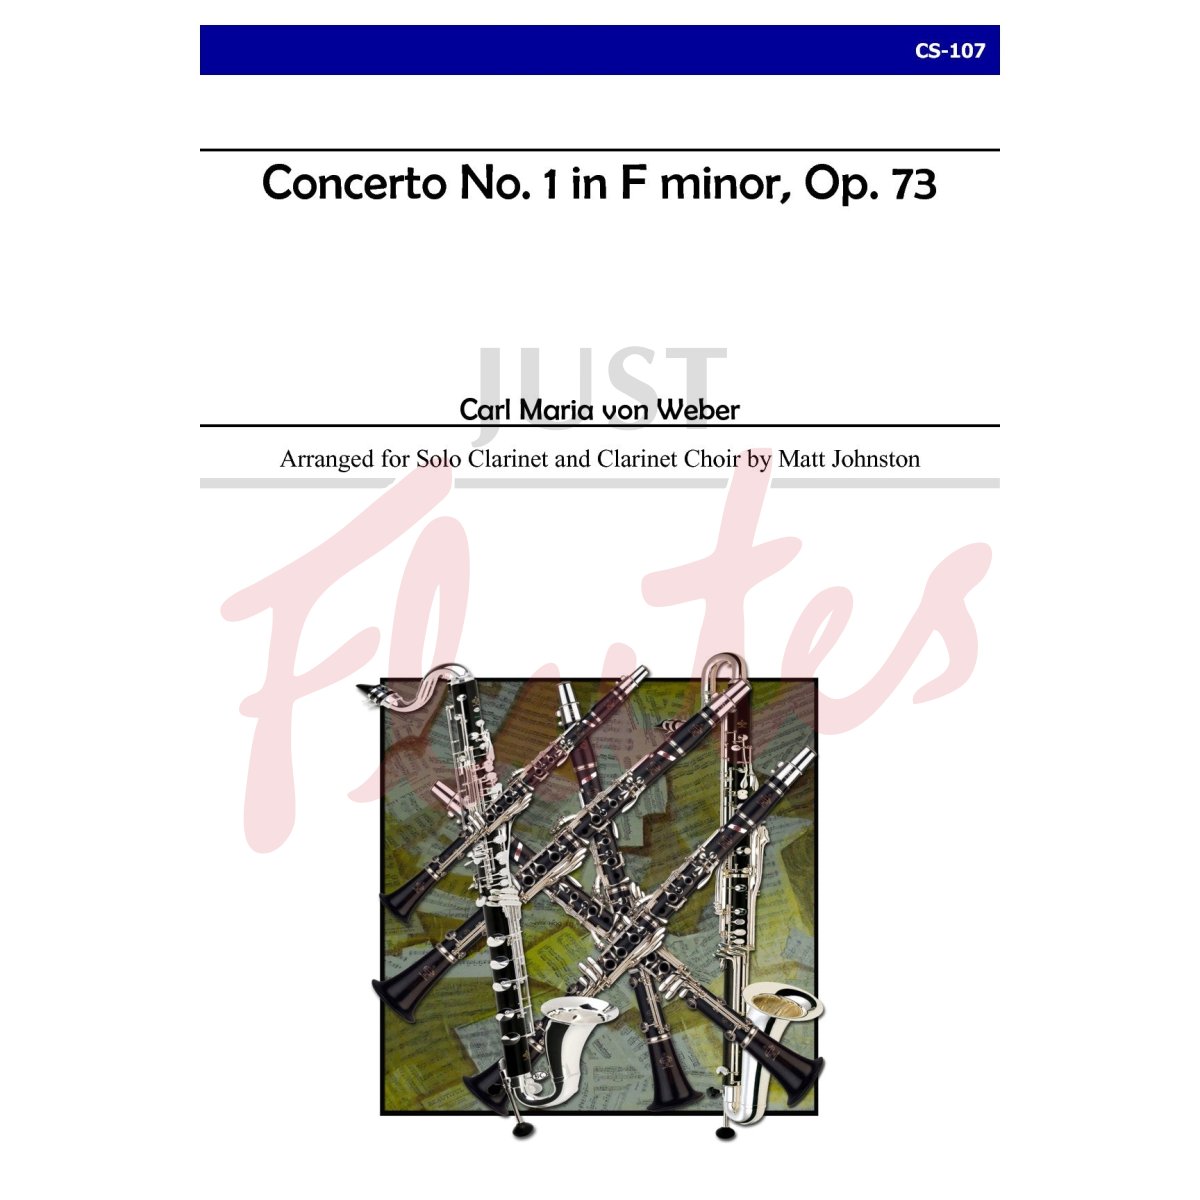 Concerto No. 1 in F minor for Solo Clarinet and Clarinet Choir